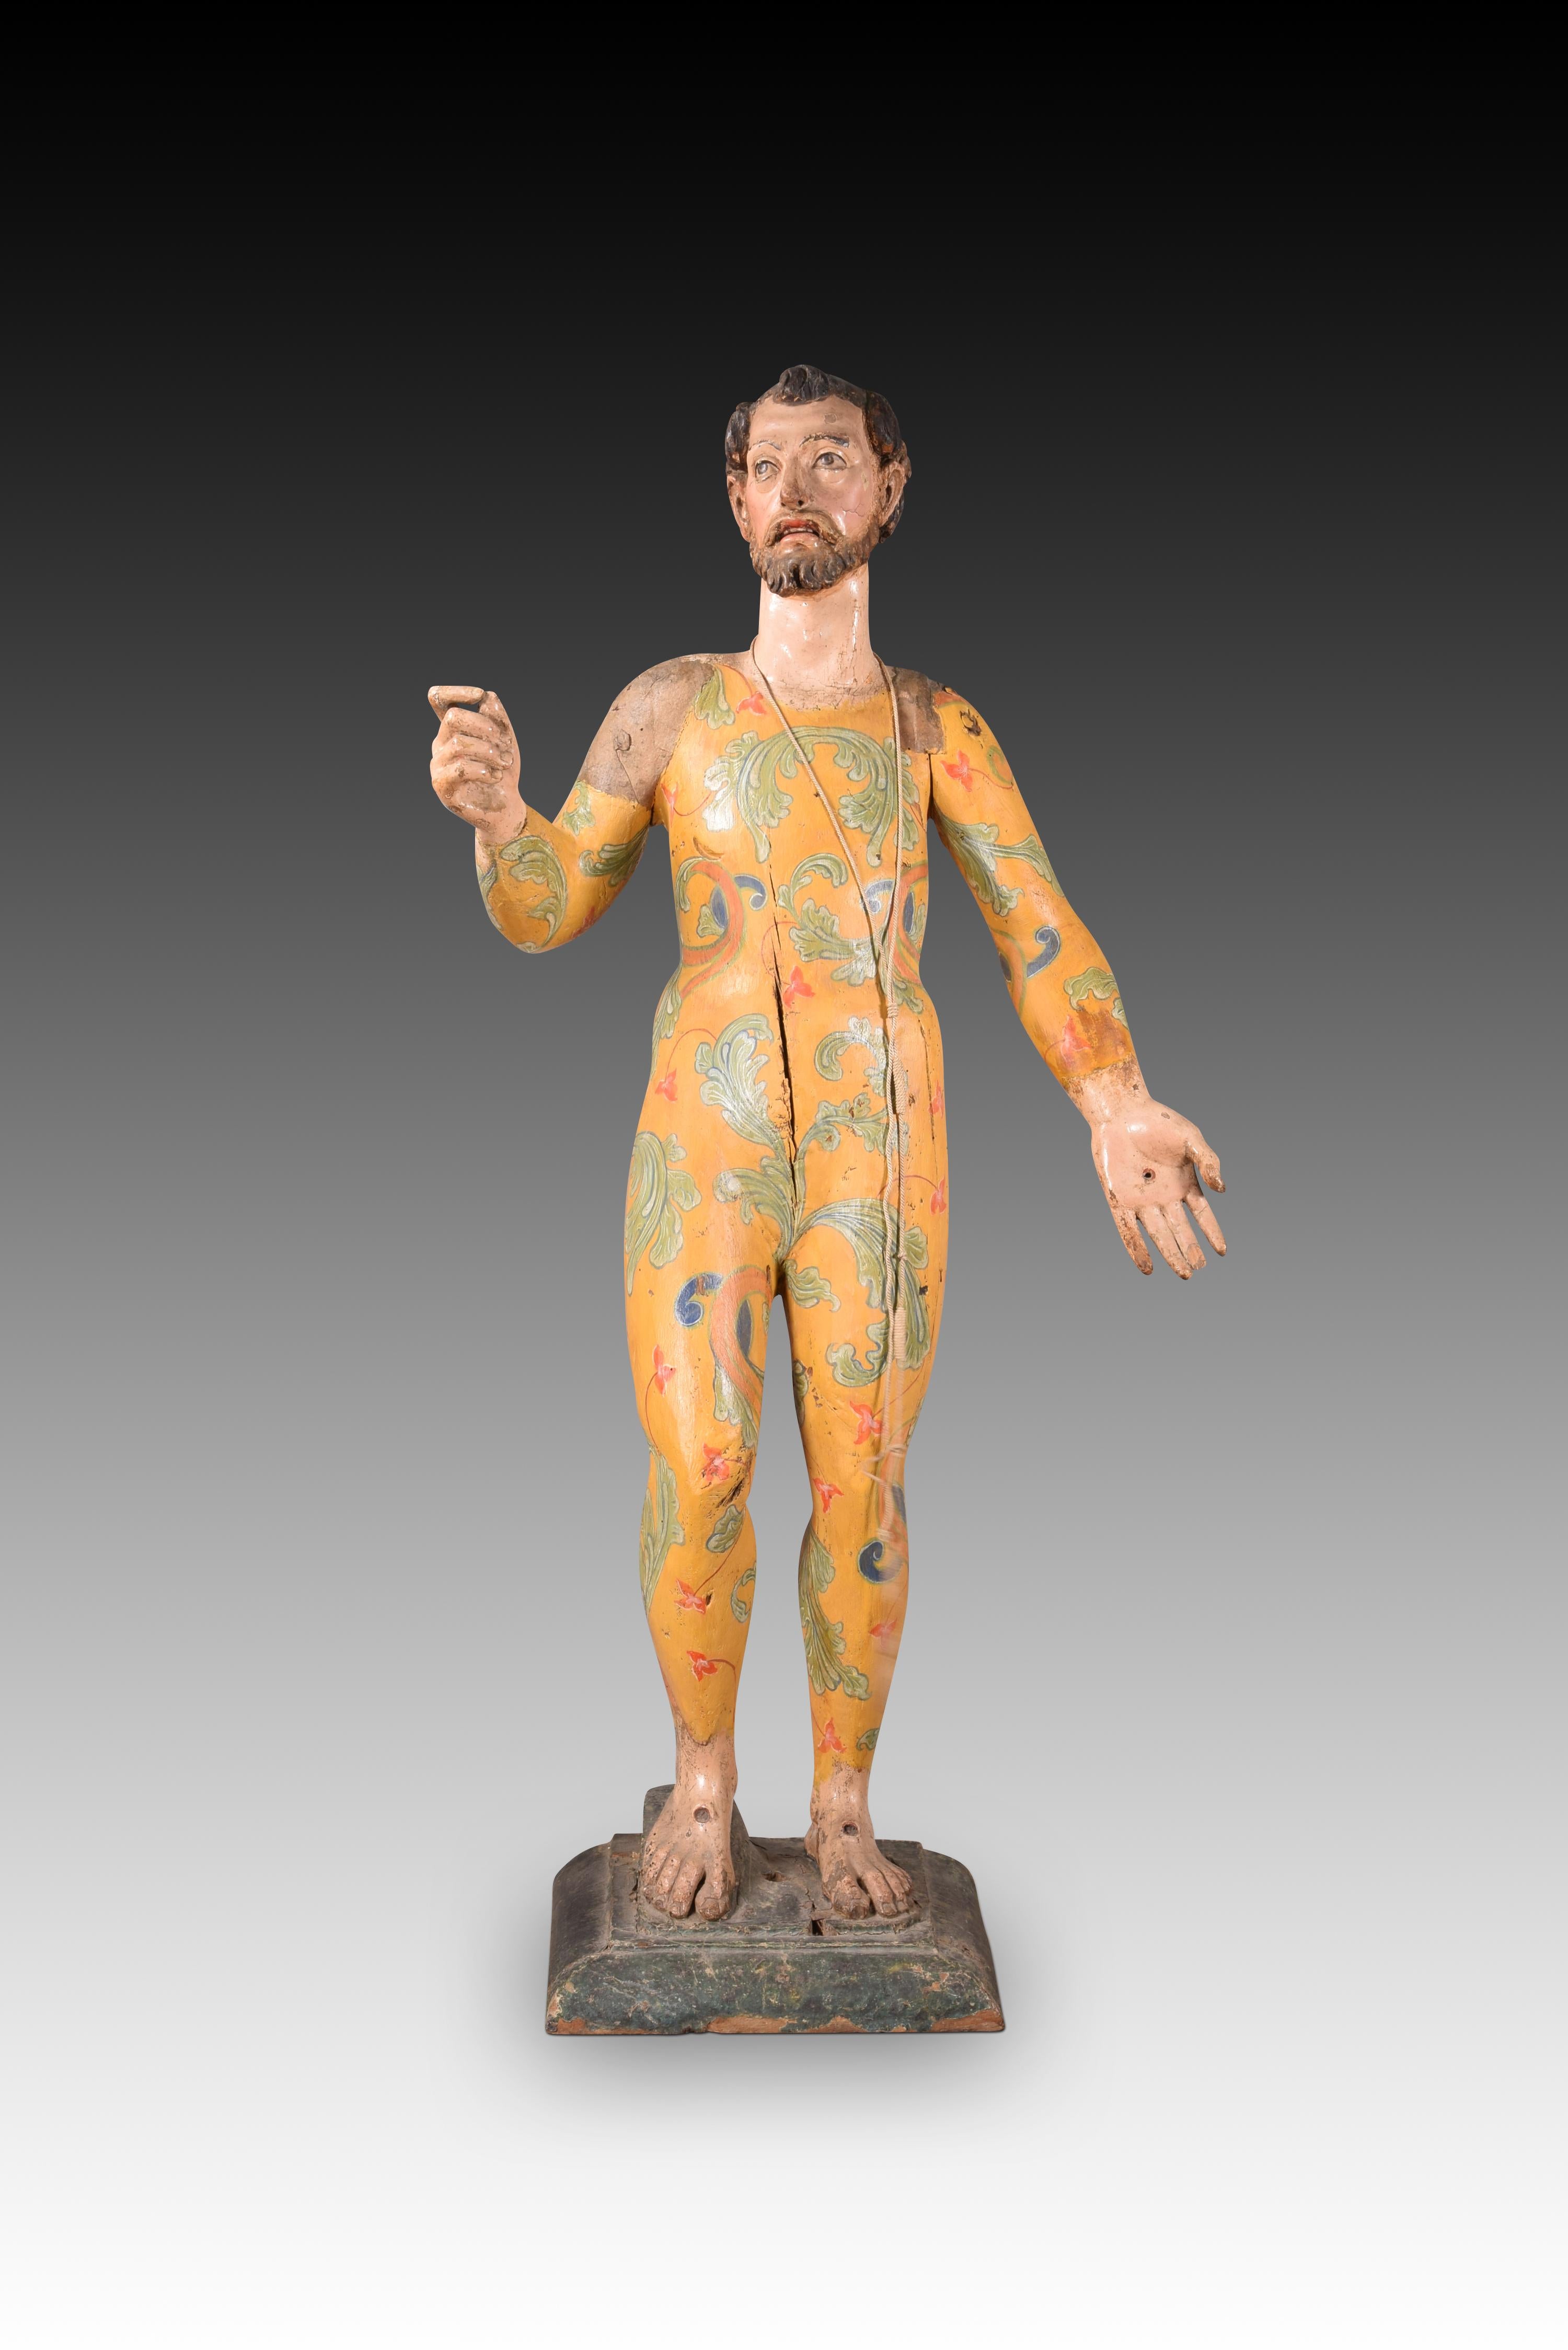 San Francisco to dress. Carved and polychrome wood. Spanish school, 17th century. 
Has damage. 
Polychrome wood carving that shows, standing on a simple pedestal, a young male figure, with short, wavy hair and a beard and moustache, with his right